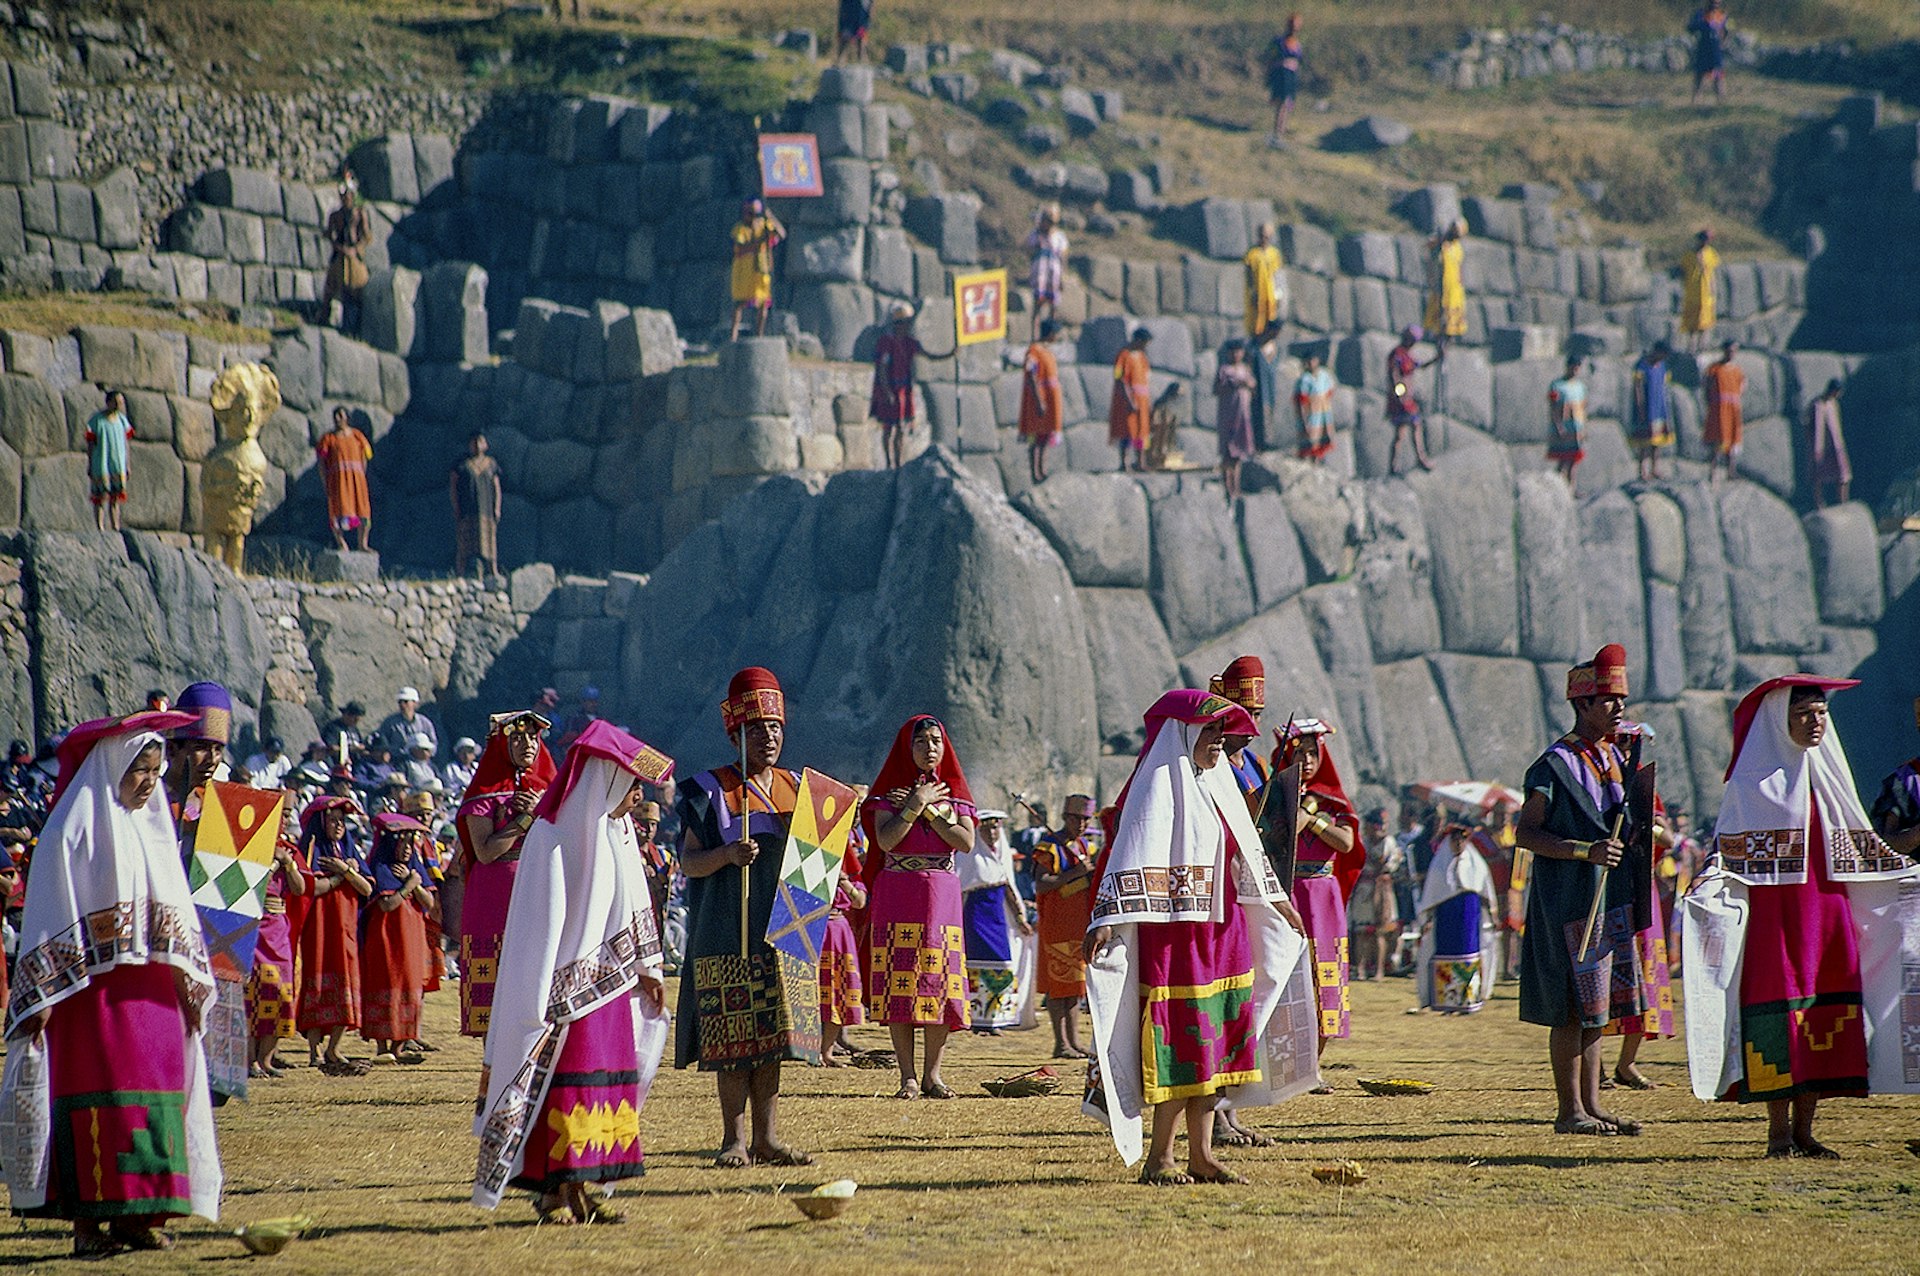 Men and women in colorful Inca dress stand in the main plaza of Sacsayhuaman, with its large stone walls visible in the background. Cuzco, Peru.